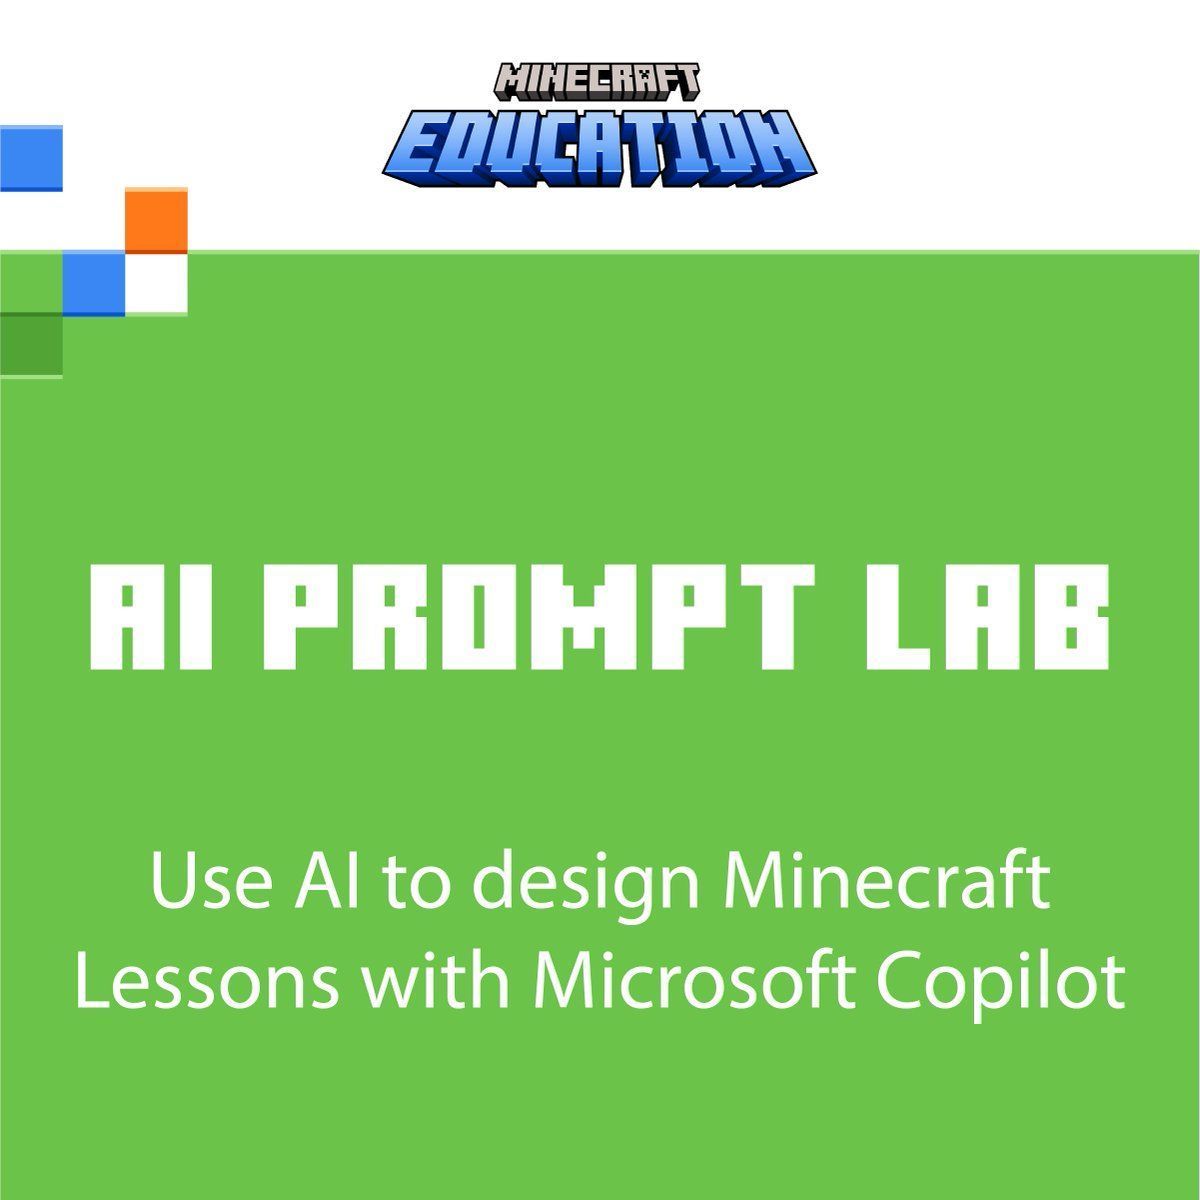 Learn more about using Microsoft Copilot to create engaging lessons and authentic assessments with Minecraft Education at msft.it/6018cbrMj

@MicrosoftEdu
 #MicrosoftReimagine #AI #MinecraftEdu